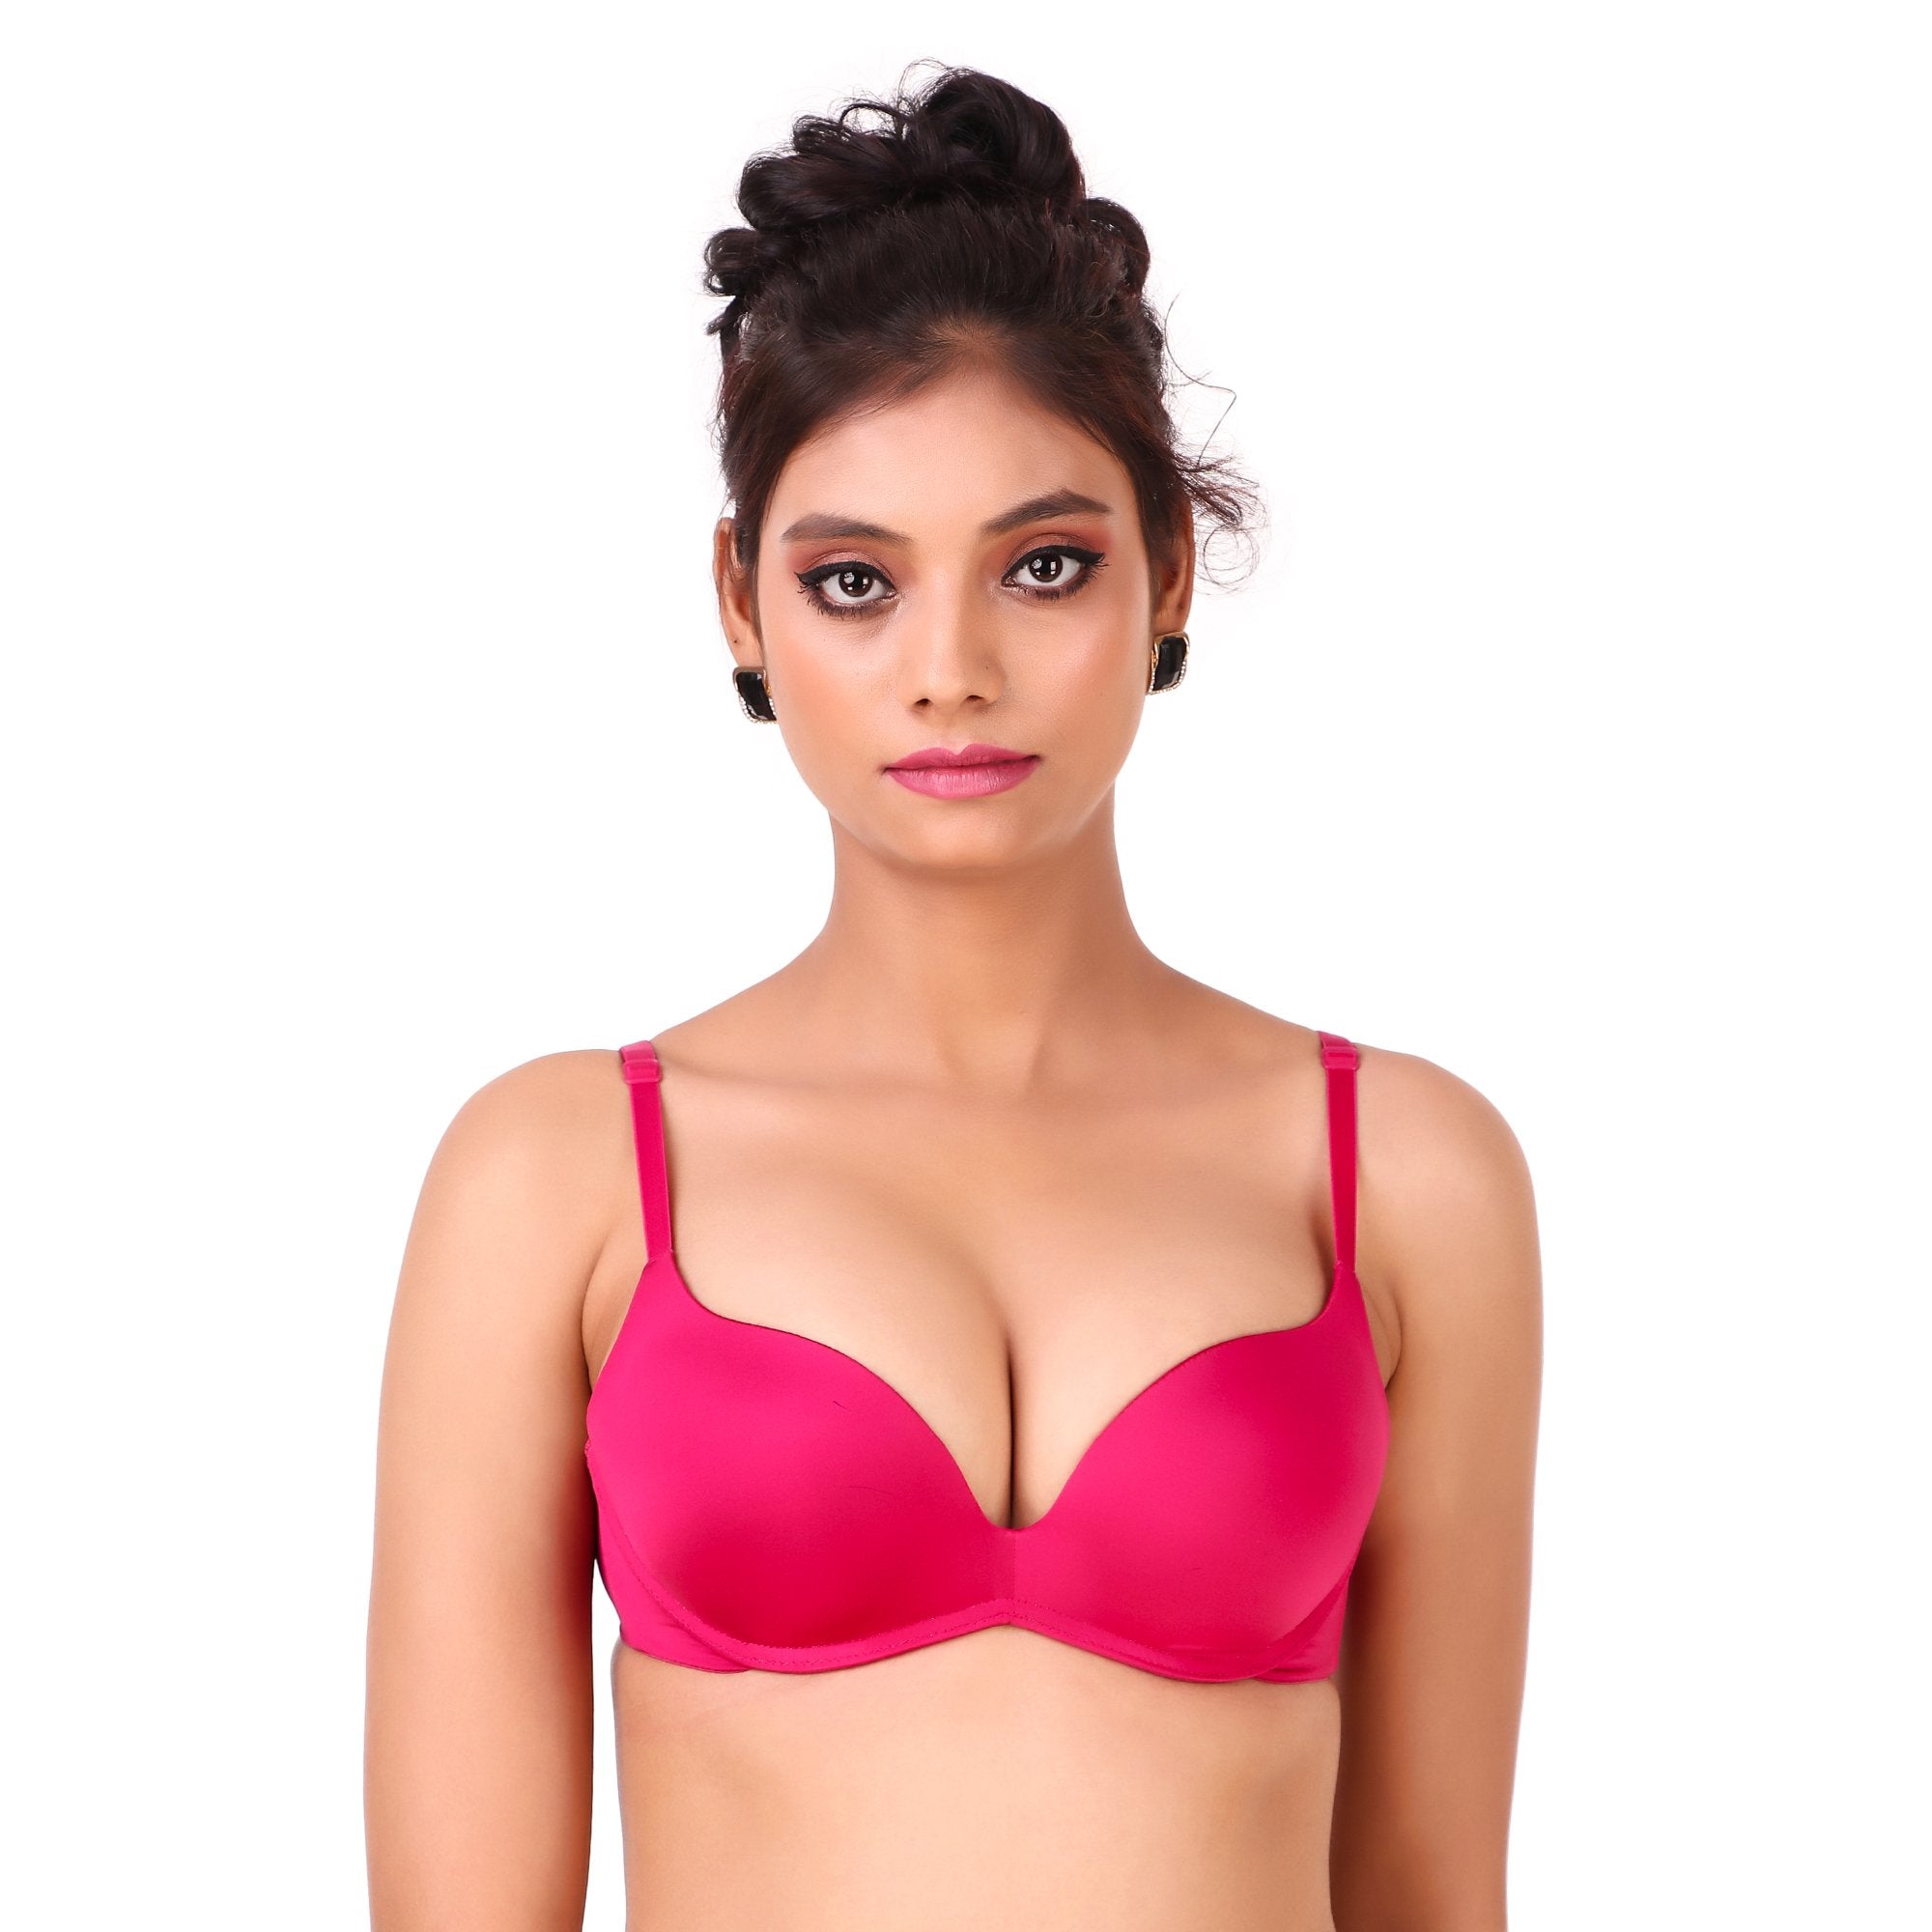 Triumph - Maximizer 715 Wired Push-Up Bra (WHU 01) (16-6368) Available  Colors: Aquamarine, Black (Featured), Beige RSP: PHP 1,400